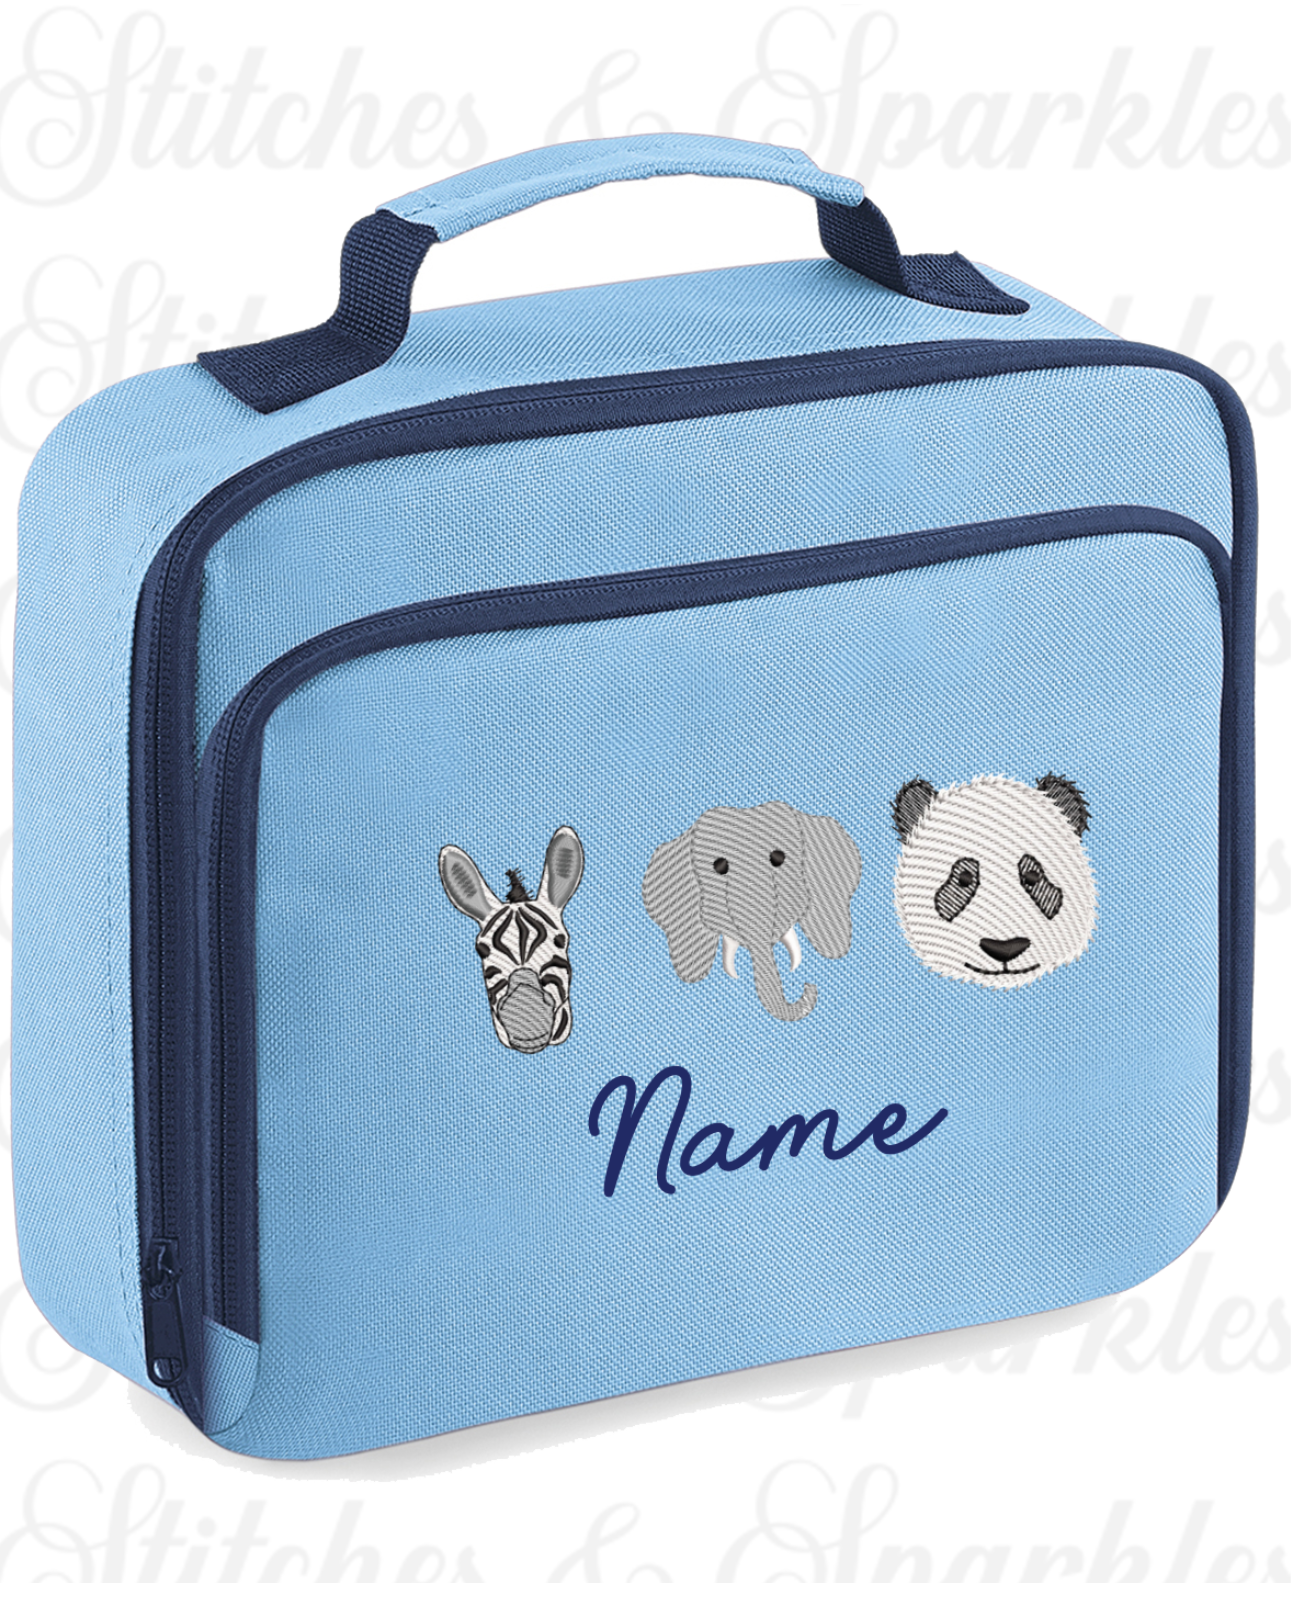 Embroidered Lunch Cooler Bag - Safari Animals